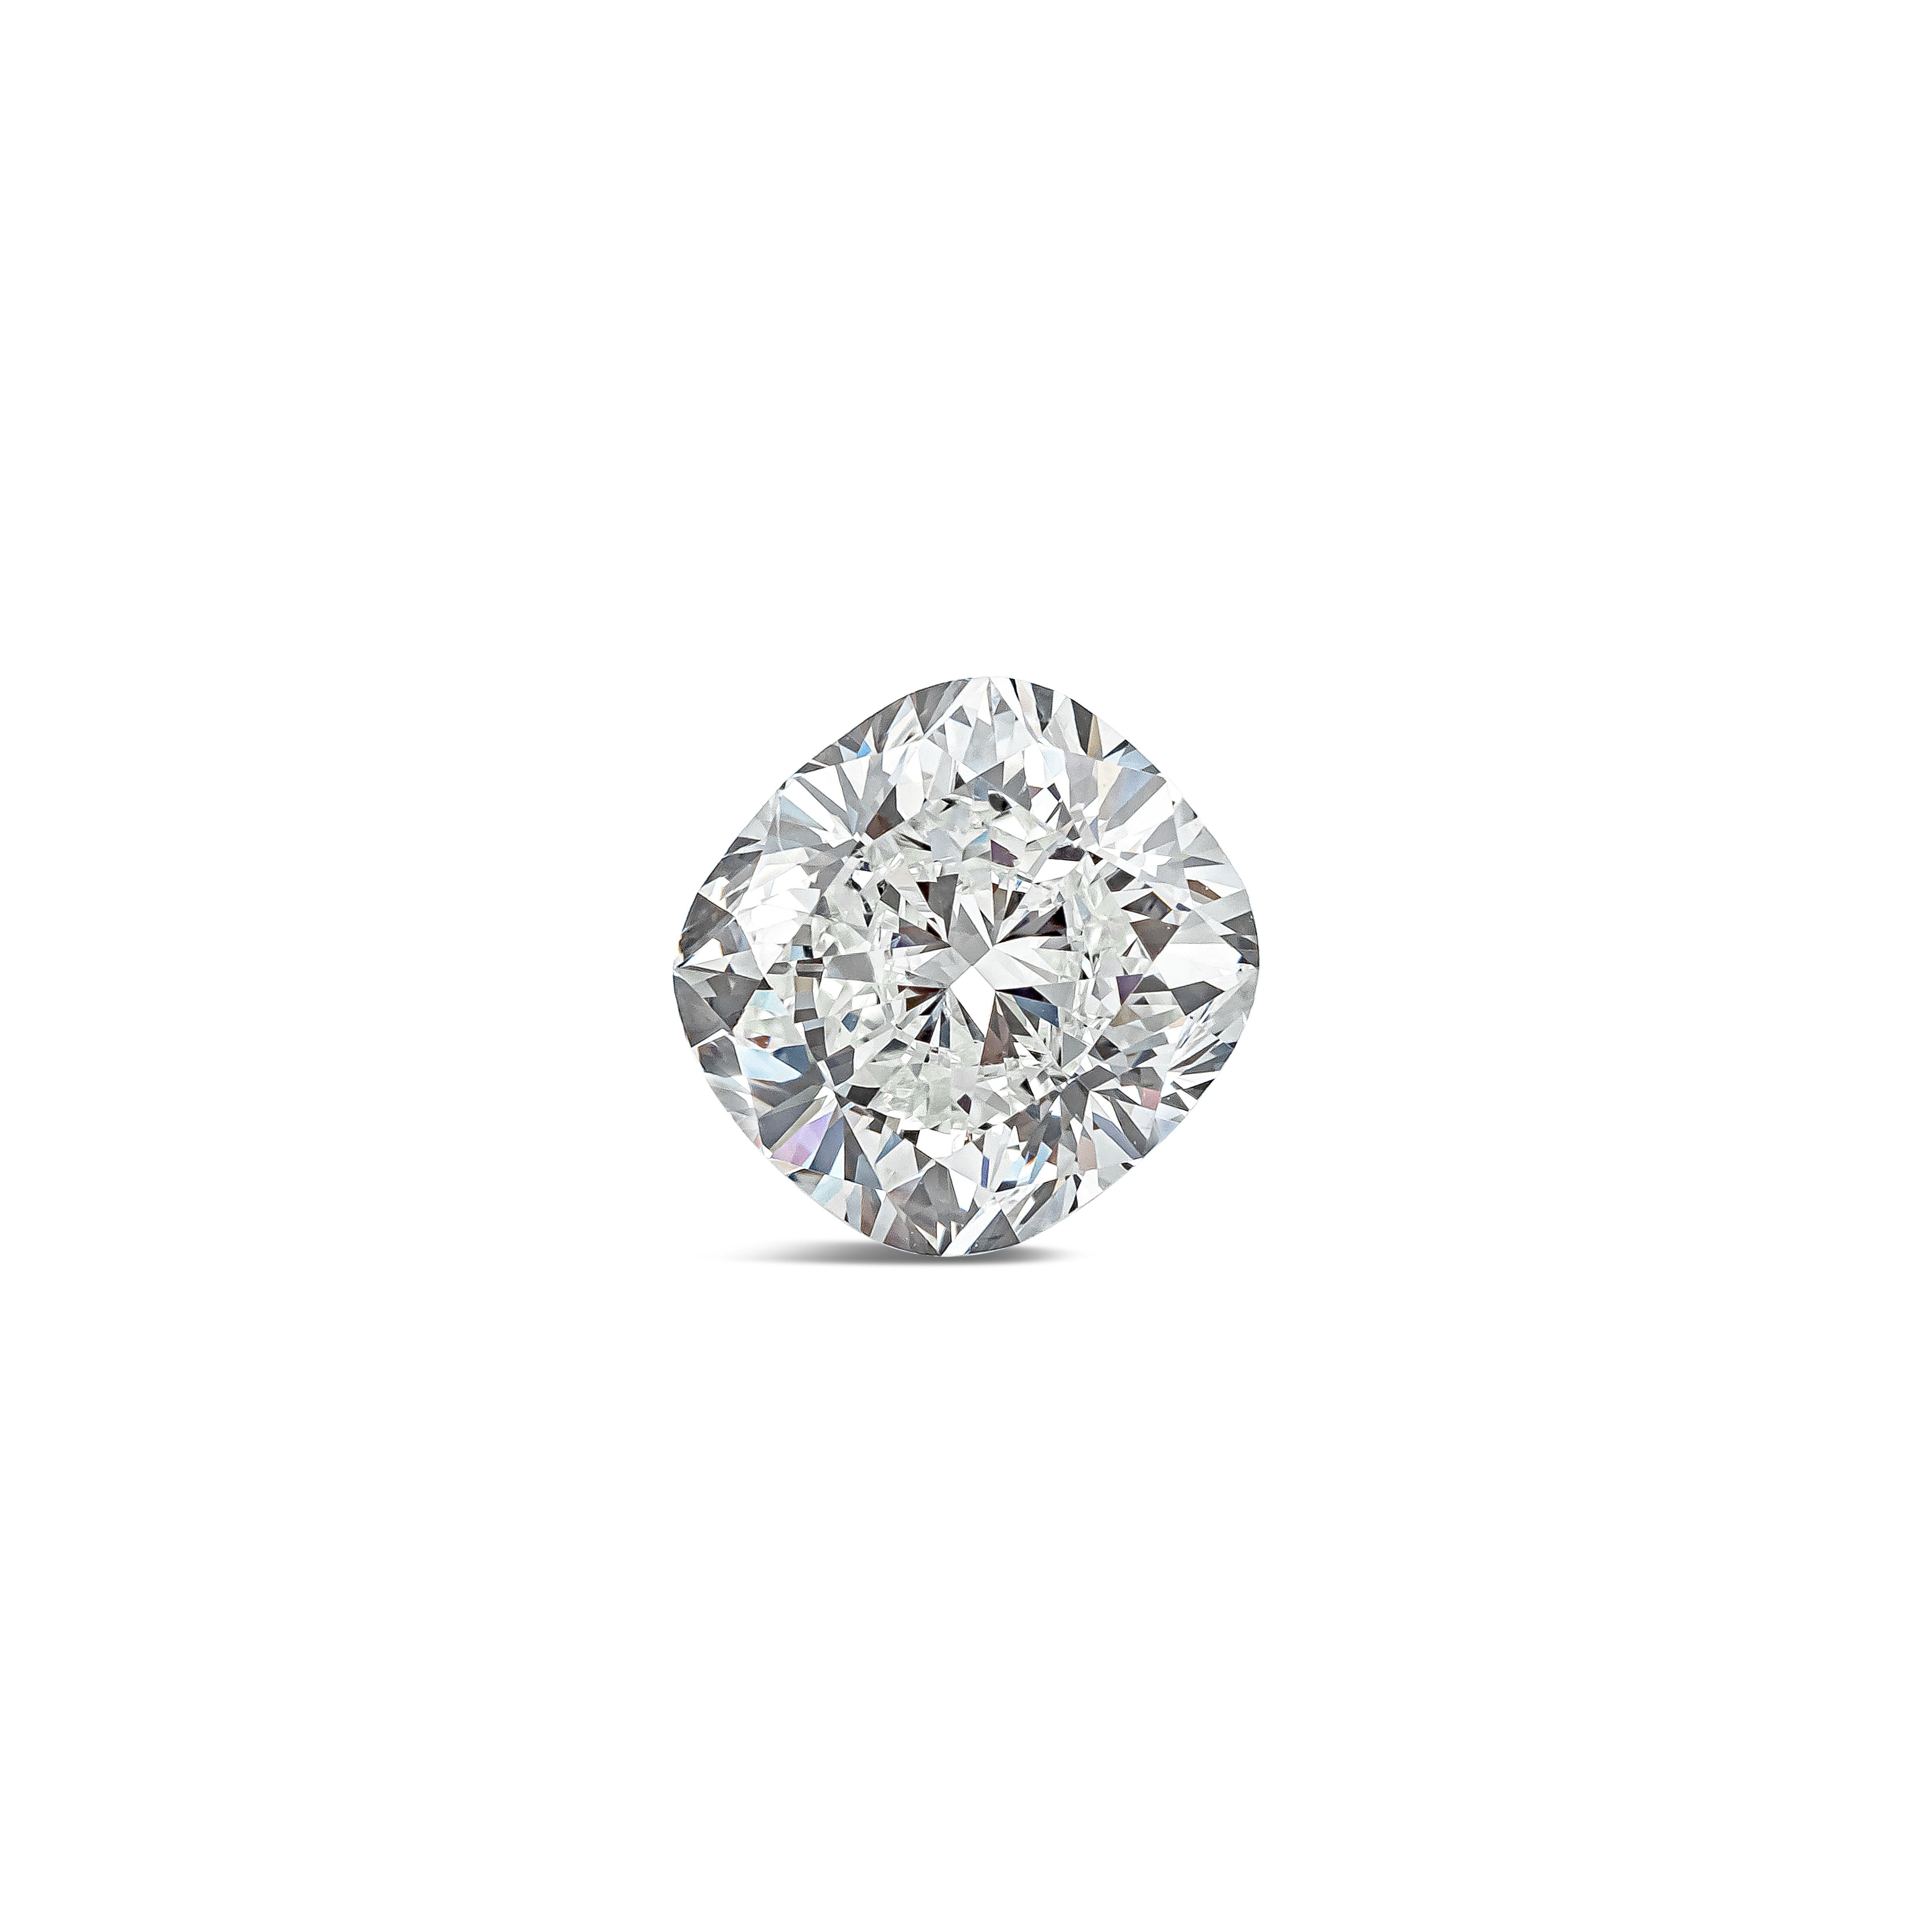 A beautiful cushion cut diamond certified by GIA as G color, SI1 clarity with excellent polish and very good symmetry. It measures 6.96 x 6.53 x 4.64 millimeters.

Available to be set in a custom handcrafted setting of your choice. Please contact us